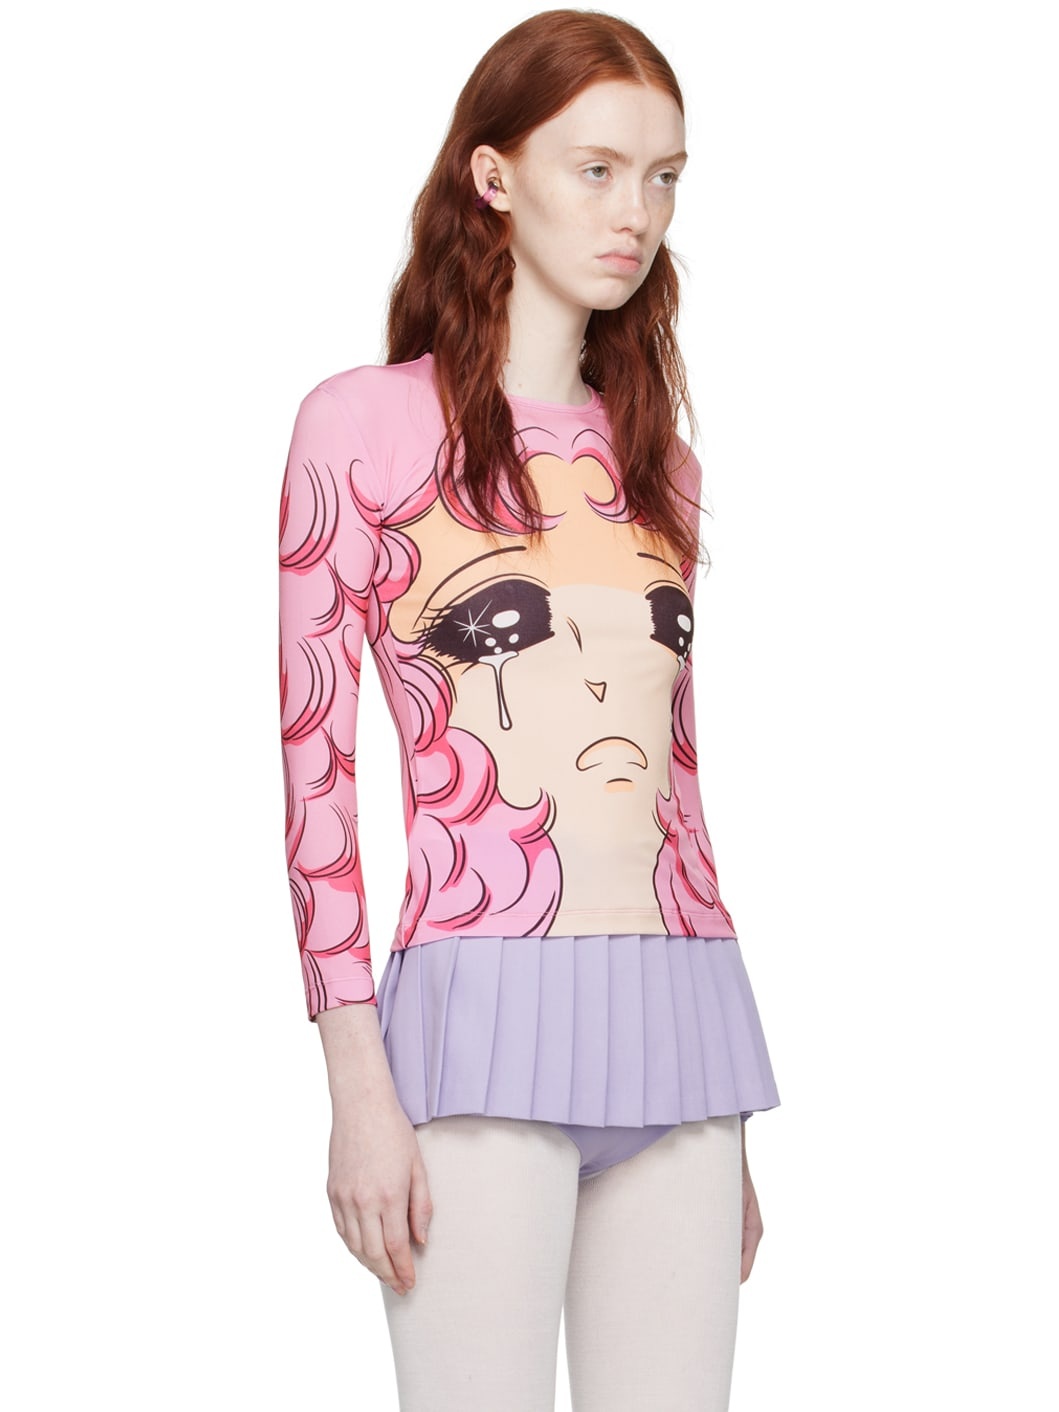 SSENSE Exclusive Pink Crying Girl Long Sleeve T-Shirt - 4